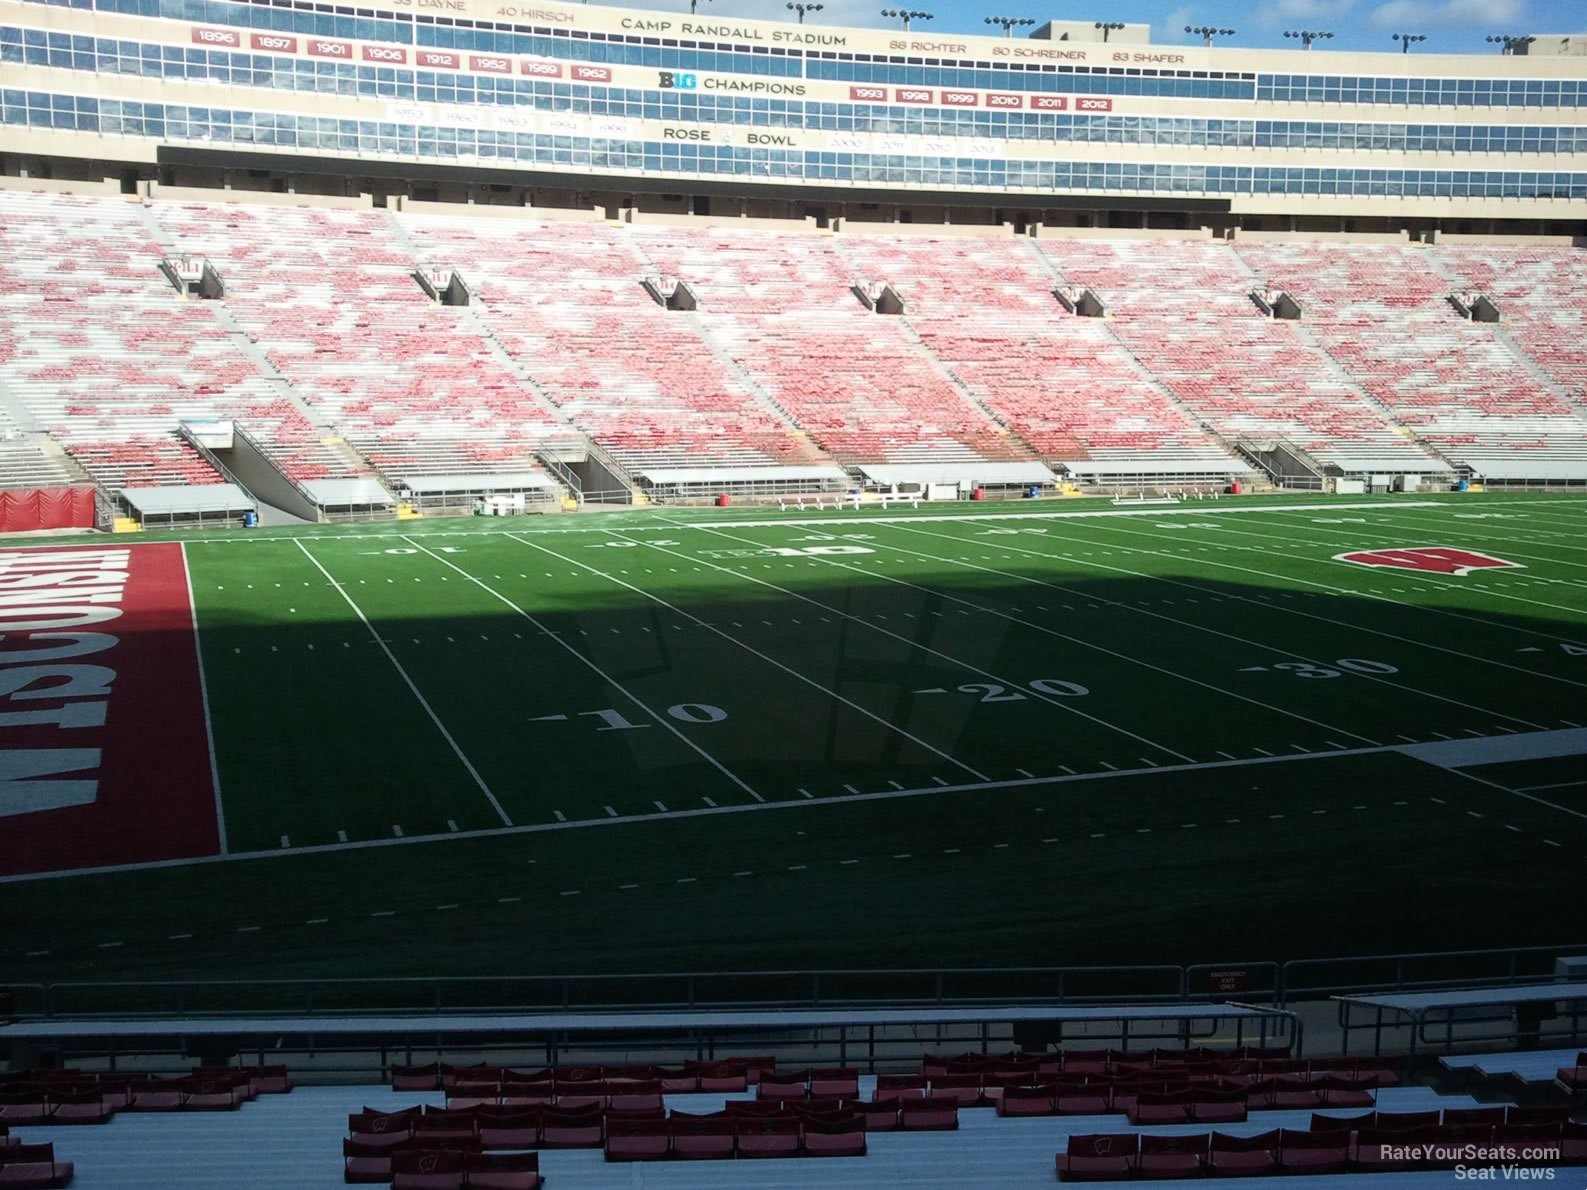 section h, row 30 seat view  - camp randall stadium